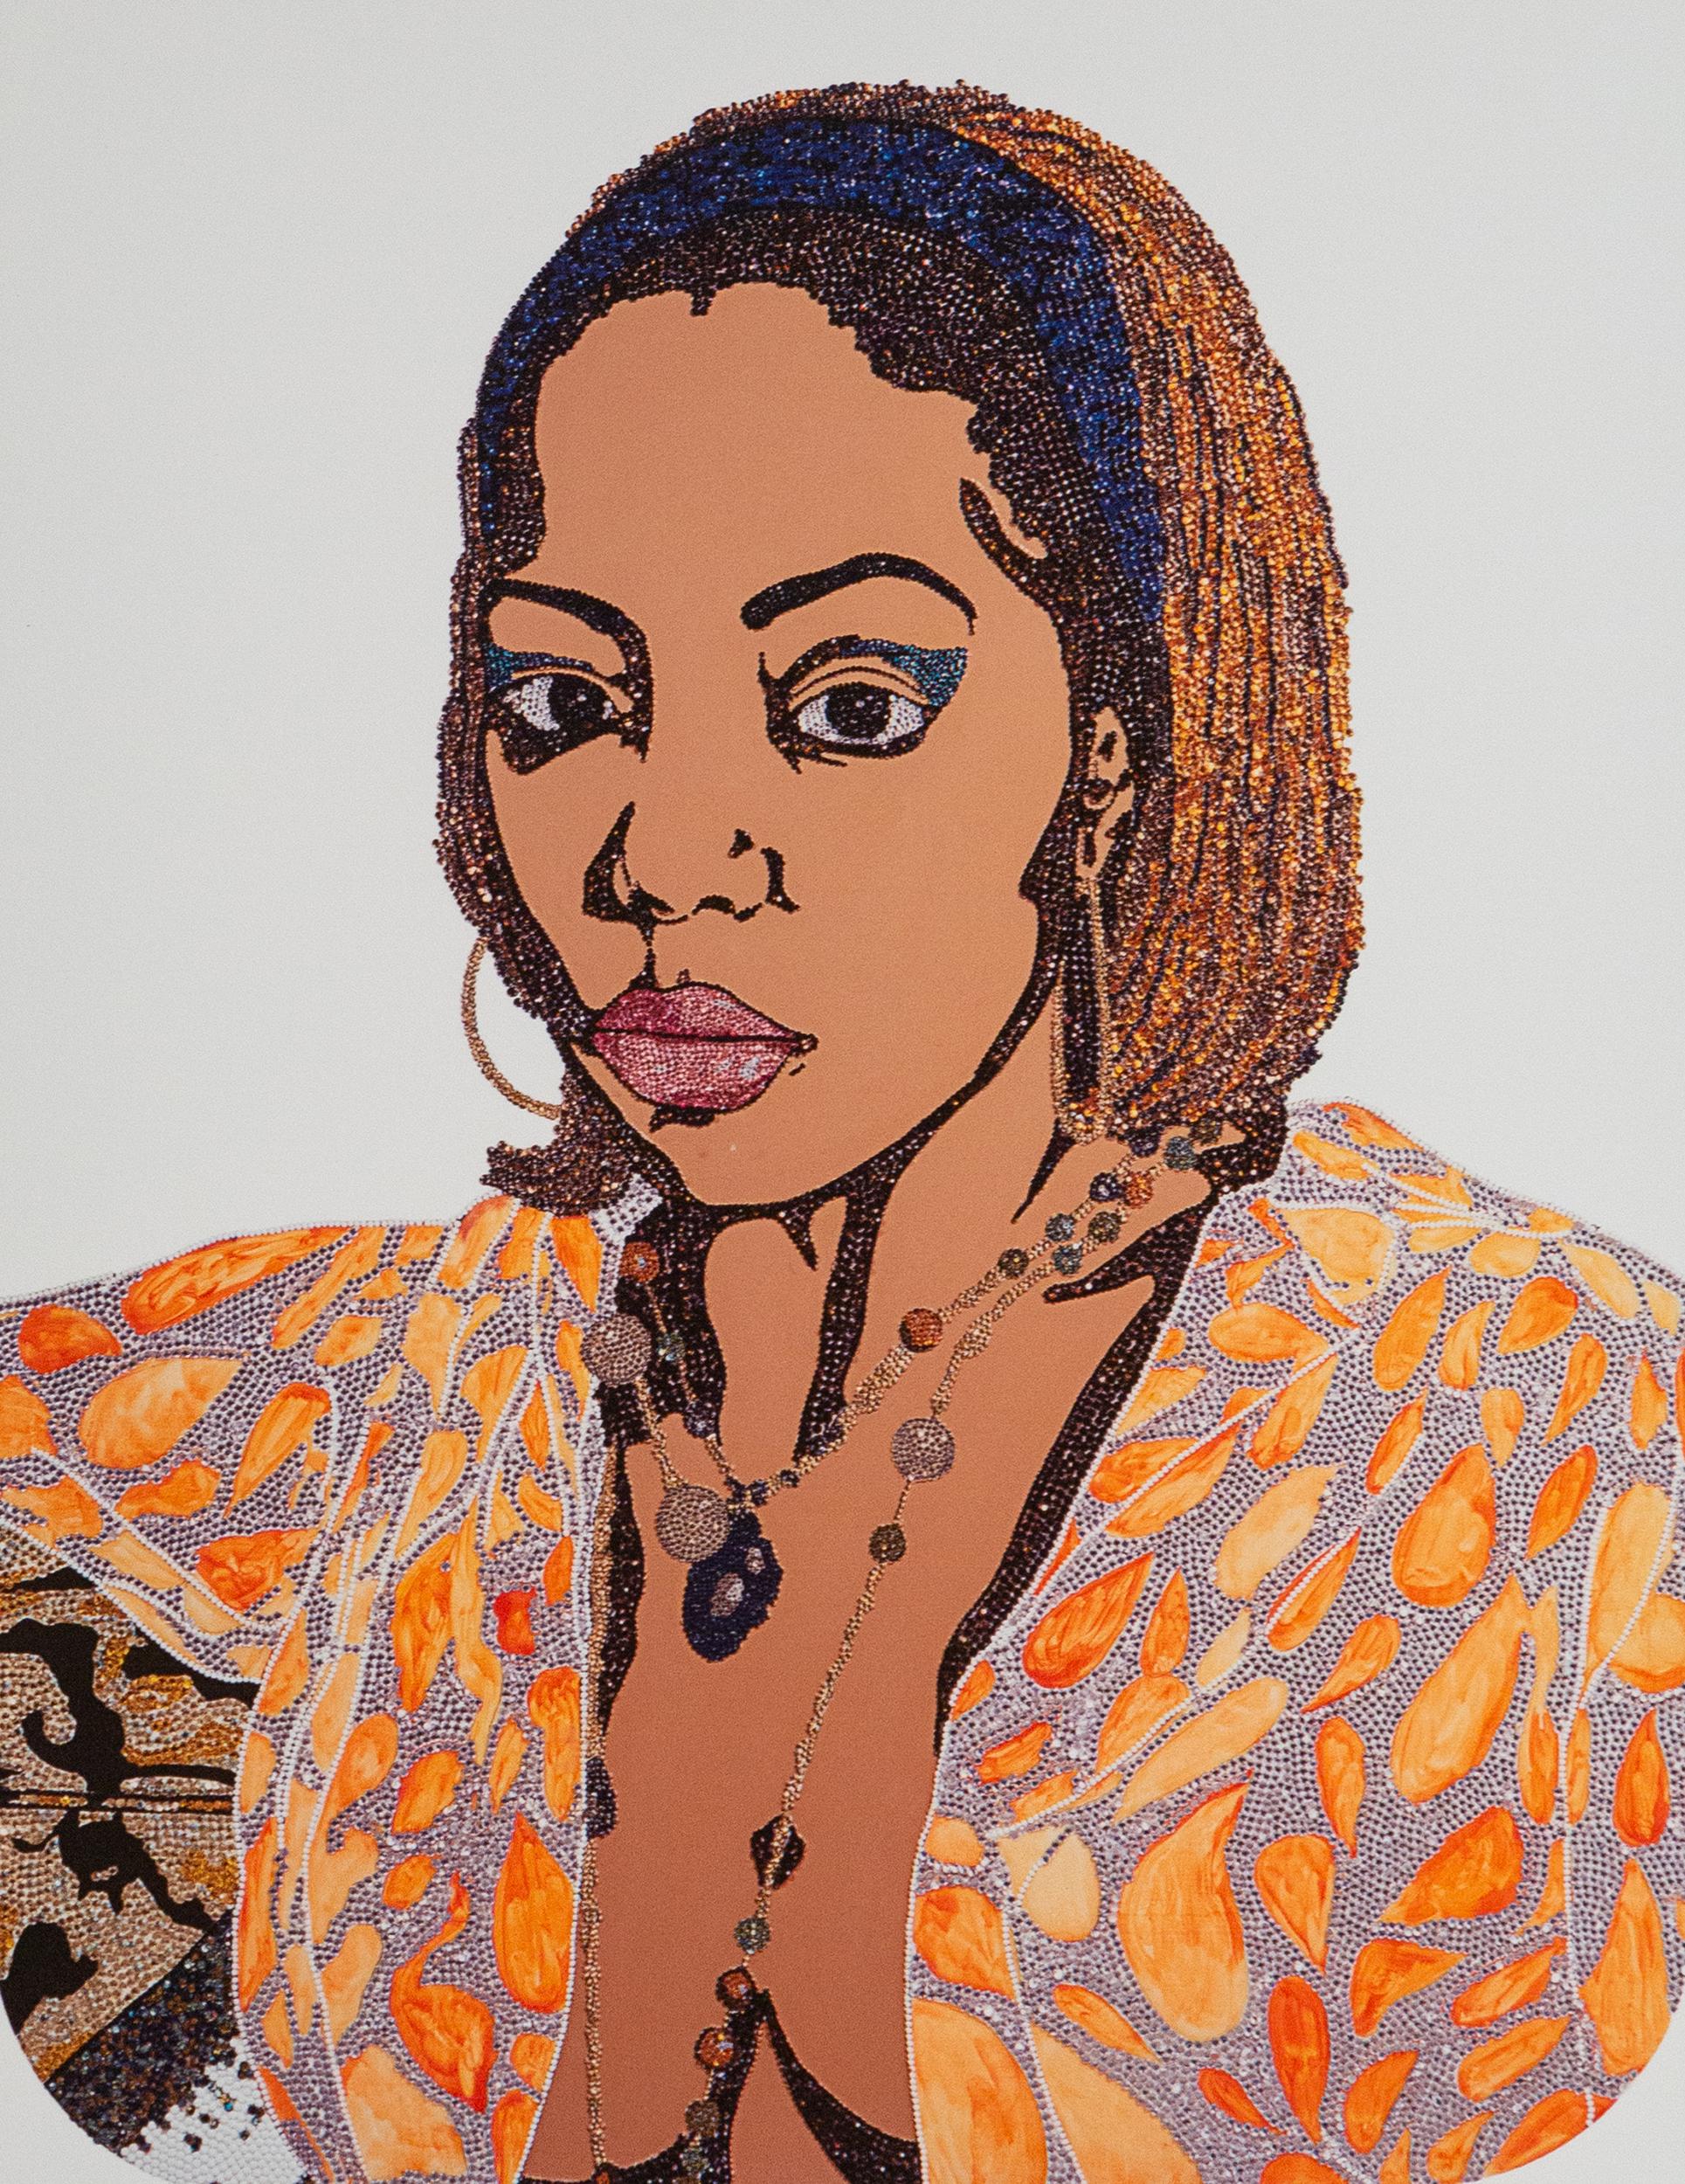 Mickalene Thomas (b.1971) is an American artist exploring the intersection of popular culture and art history, through a contemporary Black female gaze. As an openly gay Black woman, sexuality and race are essential themes in Thomas' practice.

